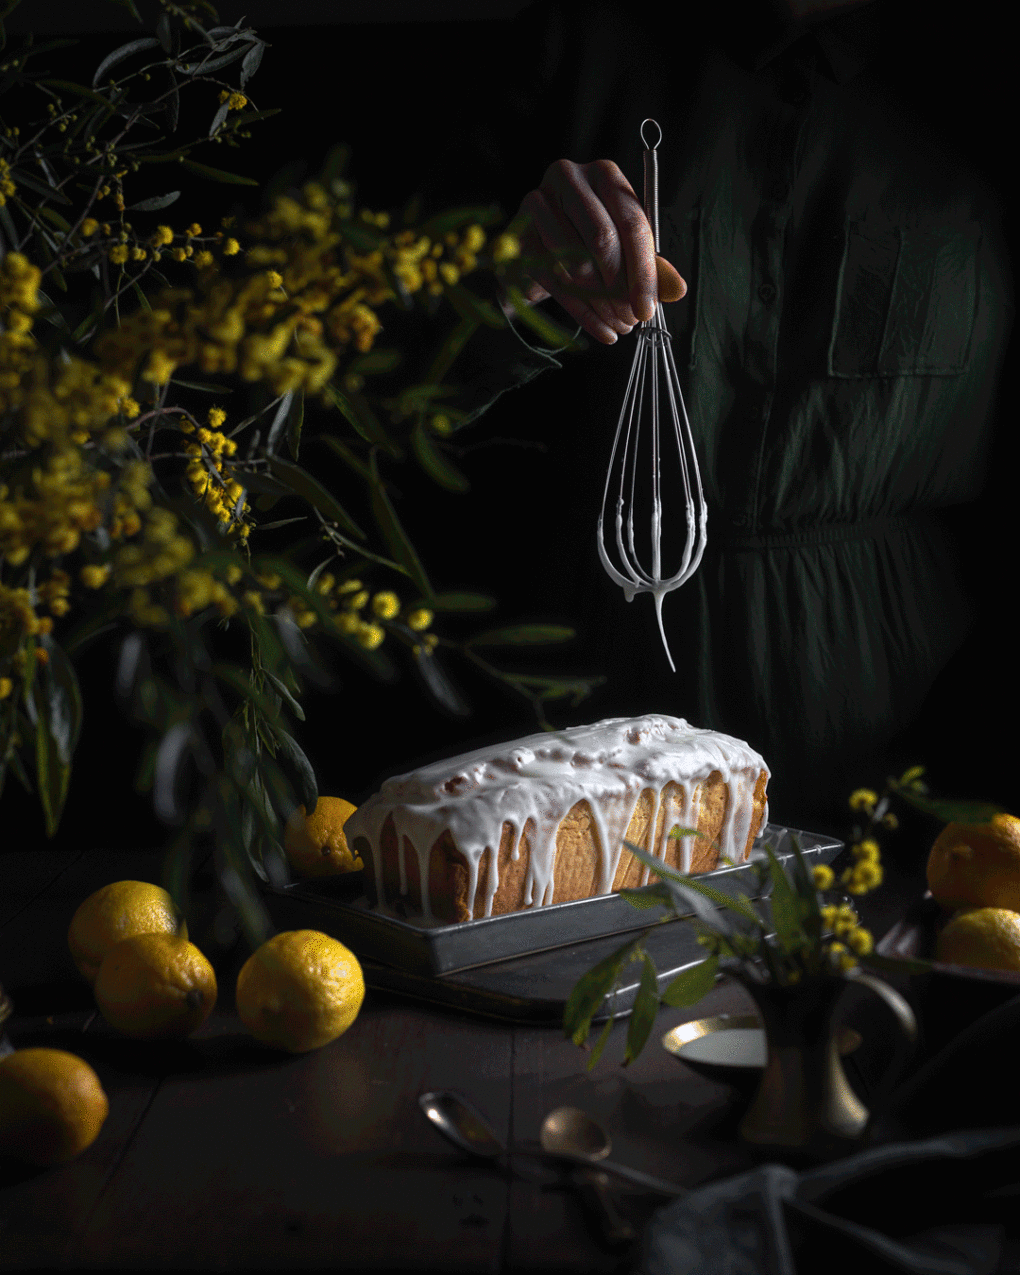 Cinemagraph of icing being drizzled onto a lemon cake